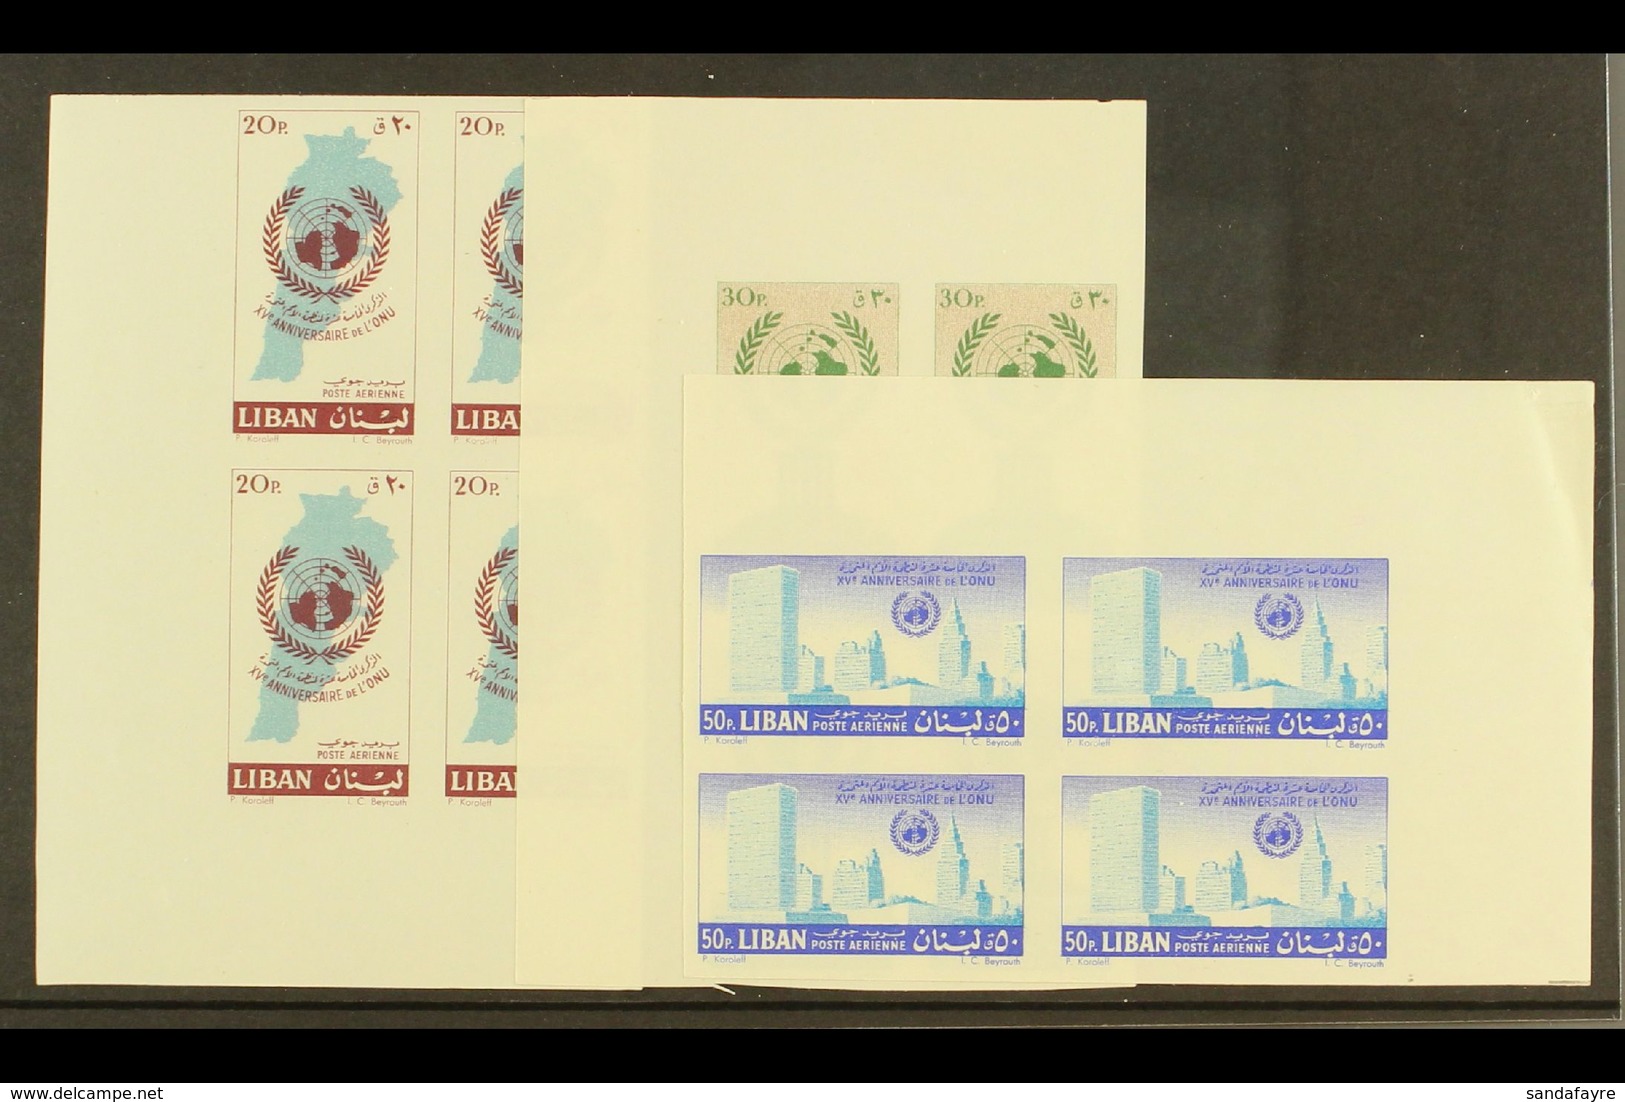 1961 Anniversary Of The United Nations IMPERFORATE Set (as SG 683/85) Never Hinged Mint CORNER BLOCKS OF FOUR (12 Stamps - Lebanon